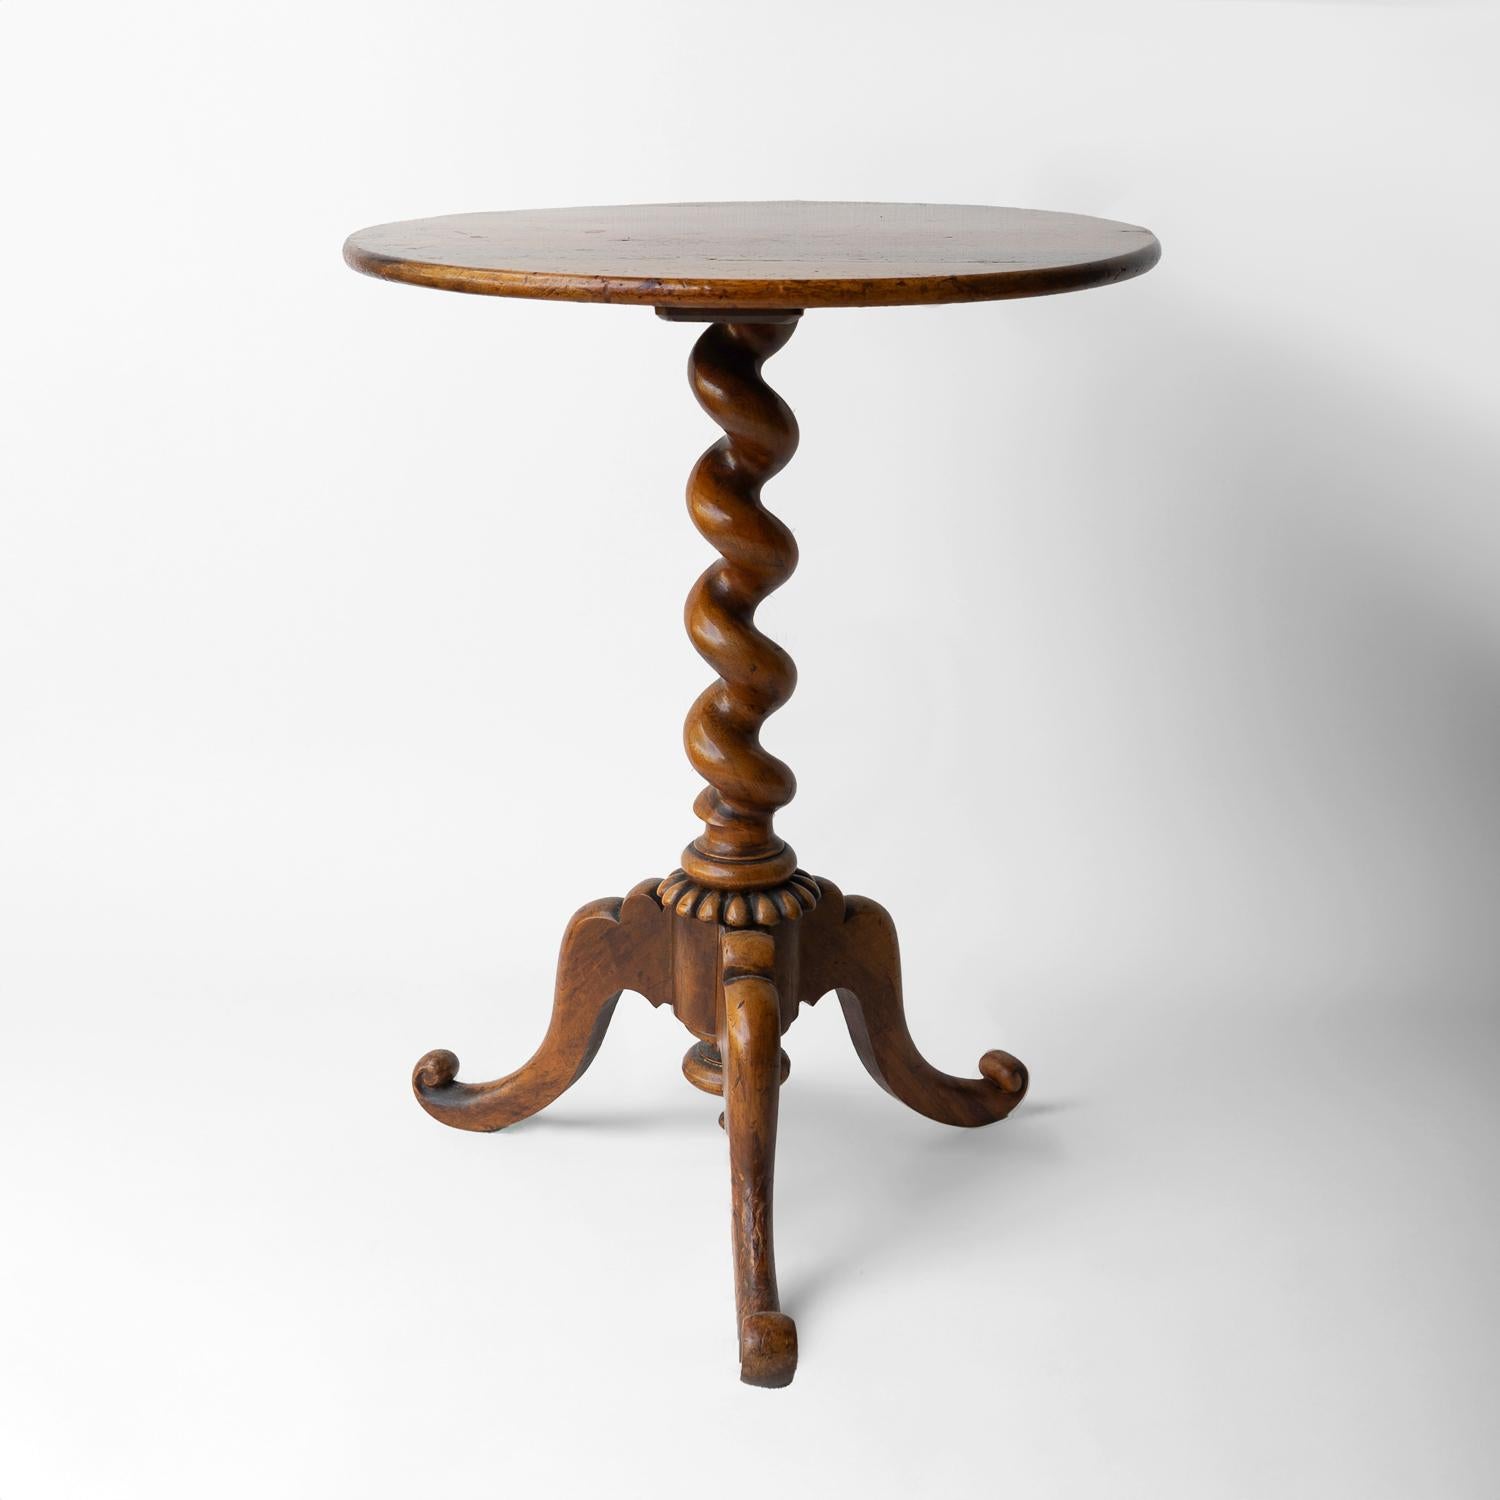 ANTIQUE WALNUT SIDE/END TABLE
A simple circular top is sitting on a beautifully carved barley twist shaft on a tripod base.

Carved from wonderfully rich, buttery walnut with a warm and lively natural patina.

Dating from the mid-late 19th Century,